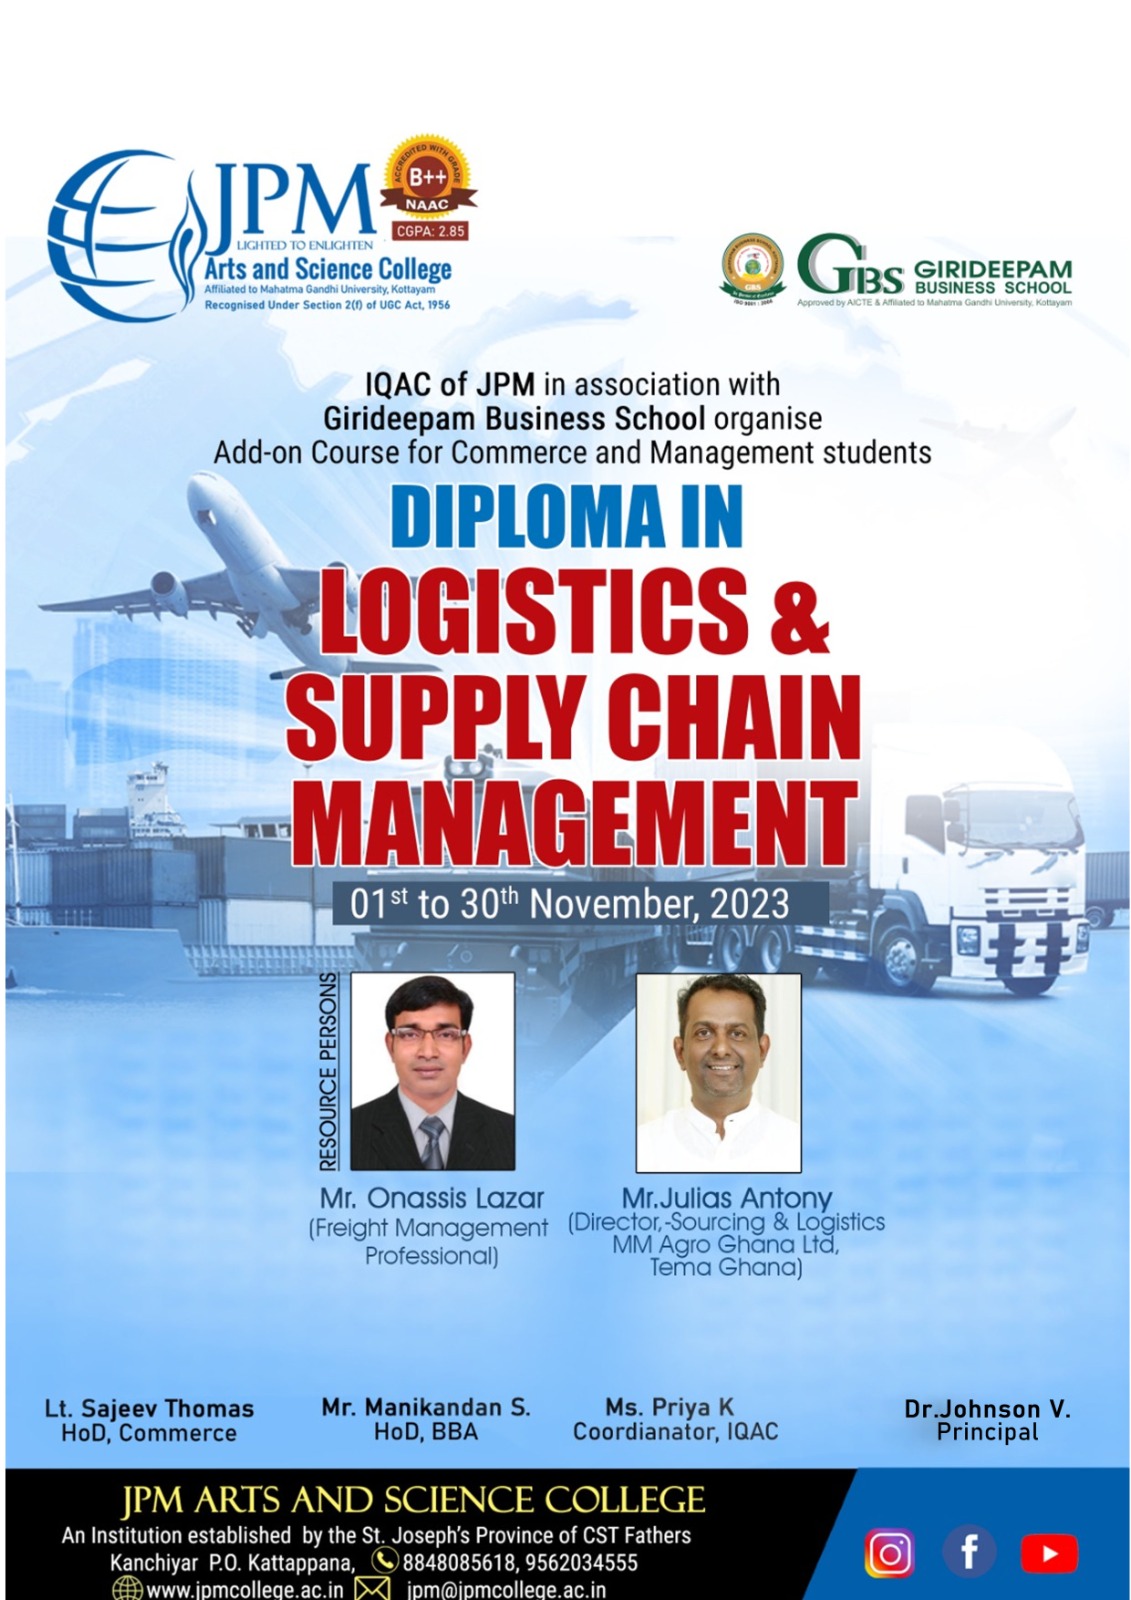 DIPLOMA IN LOGISTICS & SUPPLY CHAIN MANAGEMENT 